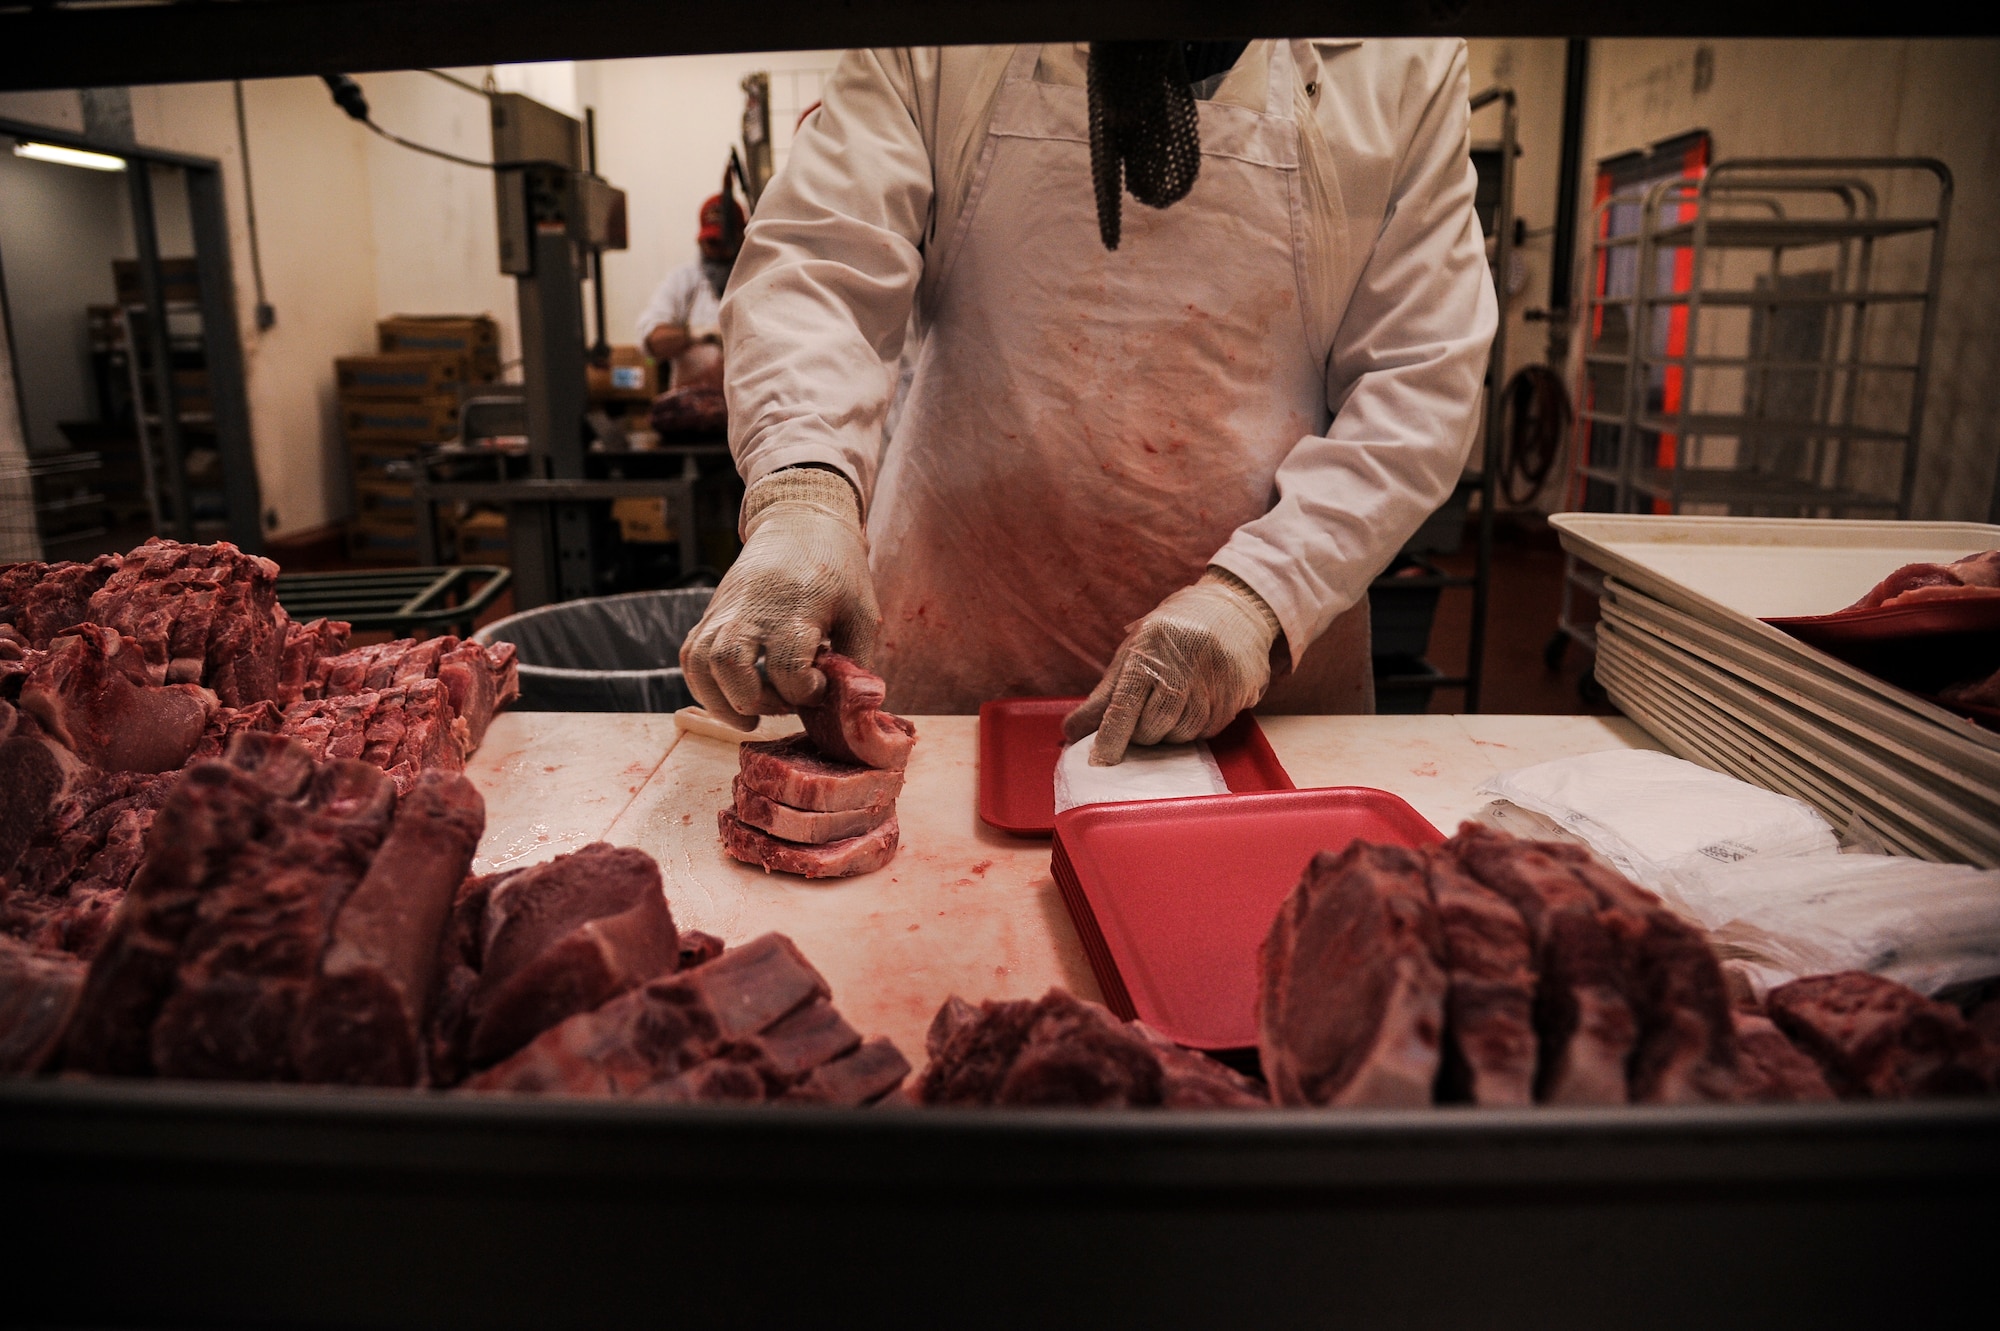 Sam Scott, Little Rock Air Force Base Commissary meat cutter, slices a piece of beef Nov. 11, 2013, at Little Rock Air Force Base, Ark. Thousands of pounds of meat are cut at the commissary on a weekly basis. (U.S. Air Force photo by Airman 1st Class Harry Brexel)